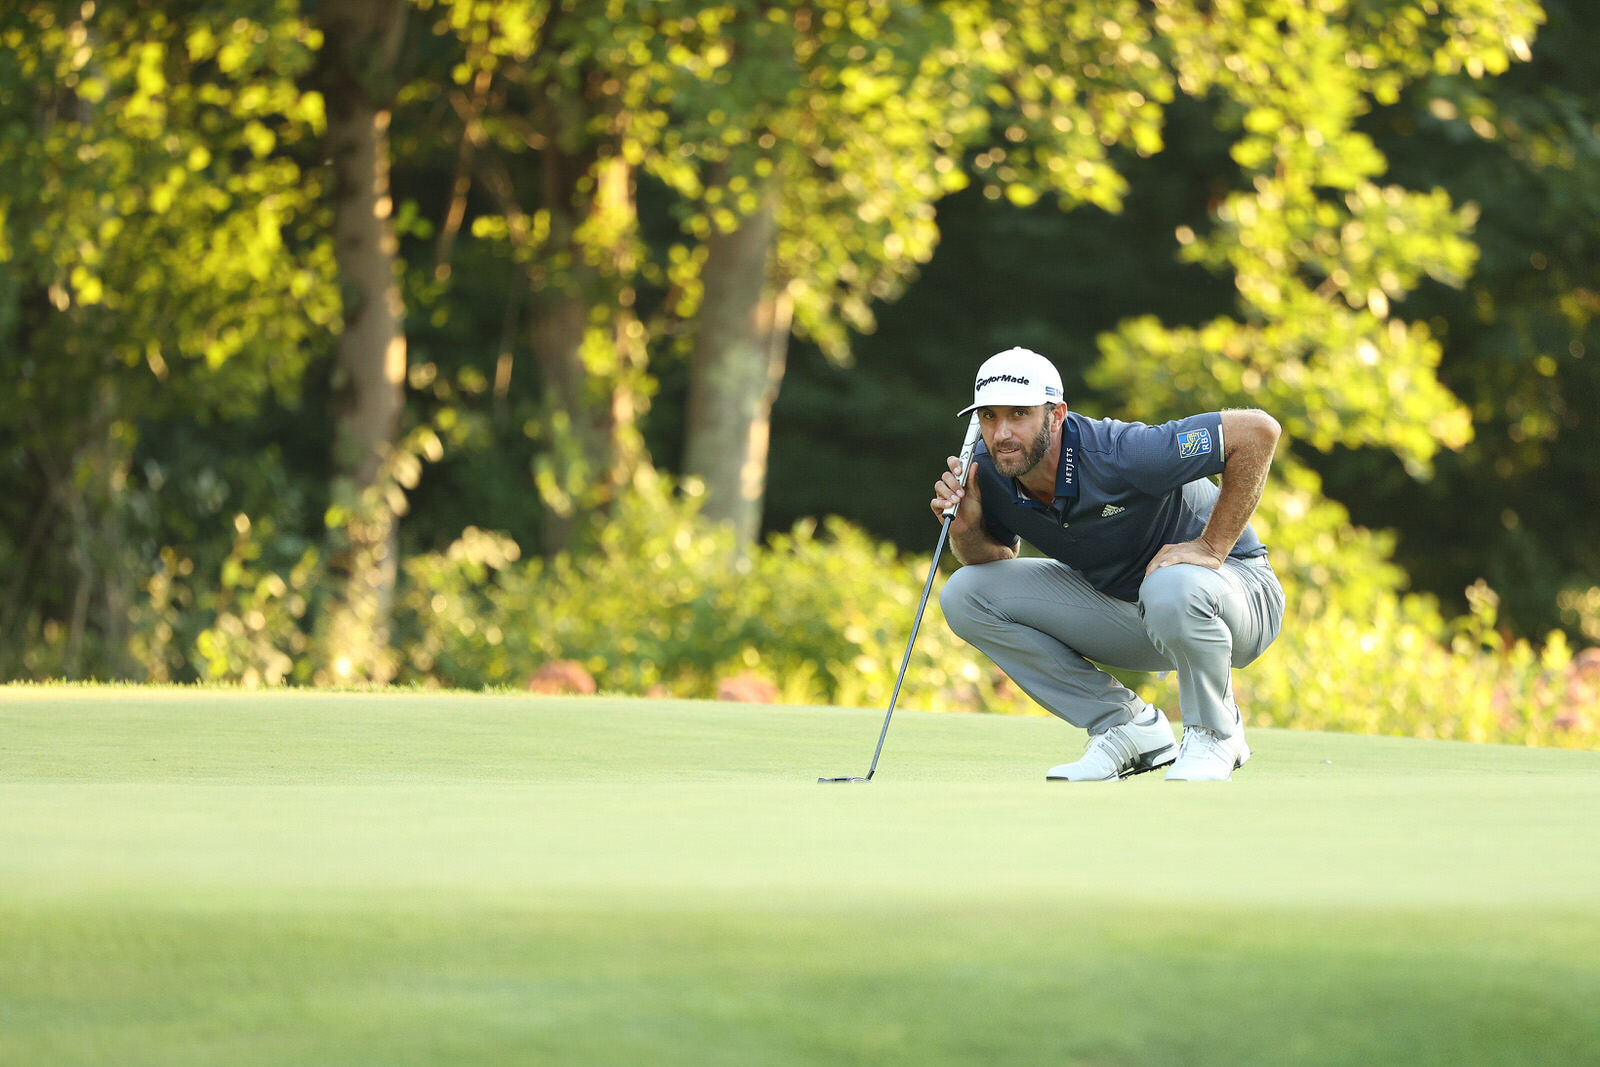  NORTON, MASSACHUSETTS - AUGUST 22: Dustin Johnson of the United States lines up a putt on the 18th green during the third round of The Northern Trust at TPC Boston on August 22, 2020 in Norton, Massachusetts. (Photo by Maddie Meyer/Getty Images) 